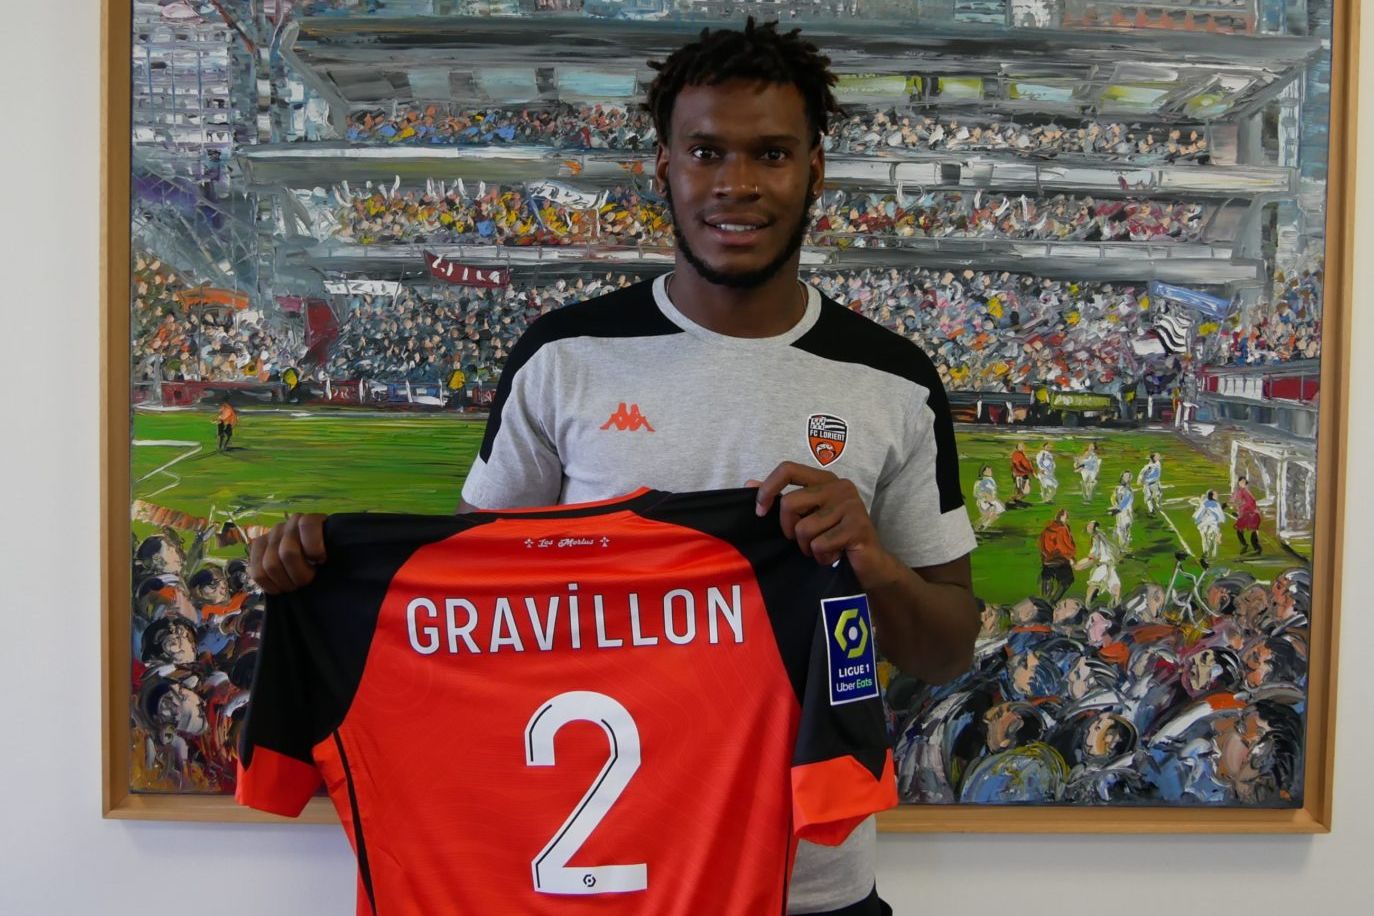 Andrew Gravillon: “Inter Remains My Goal But Now I Think About Playing As Much As Possible For Lorient”